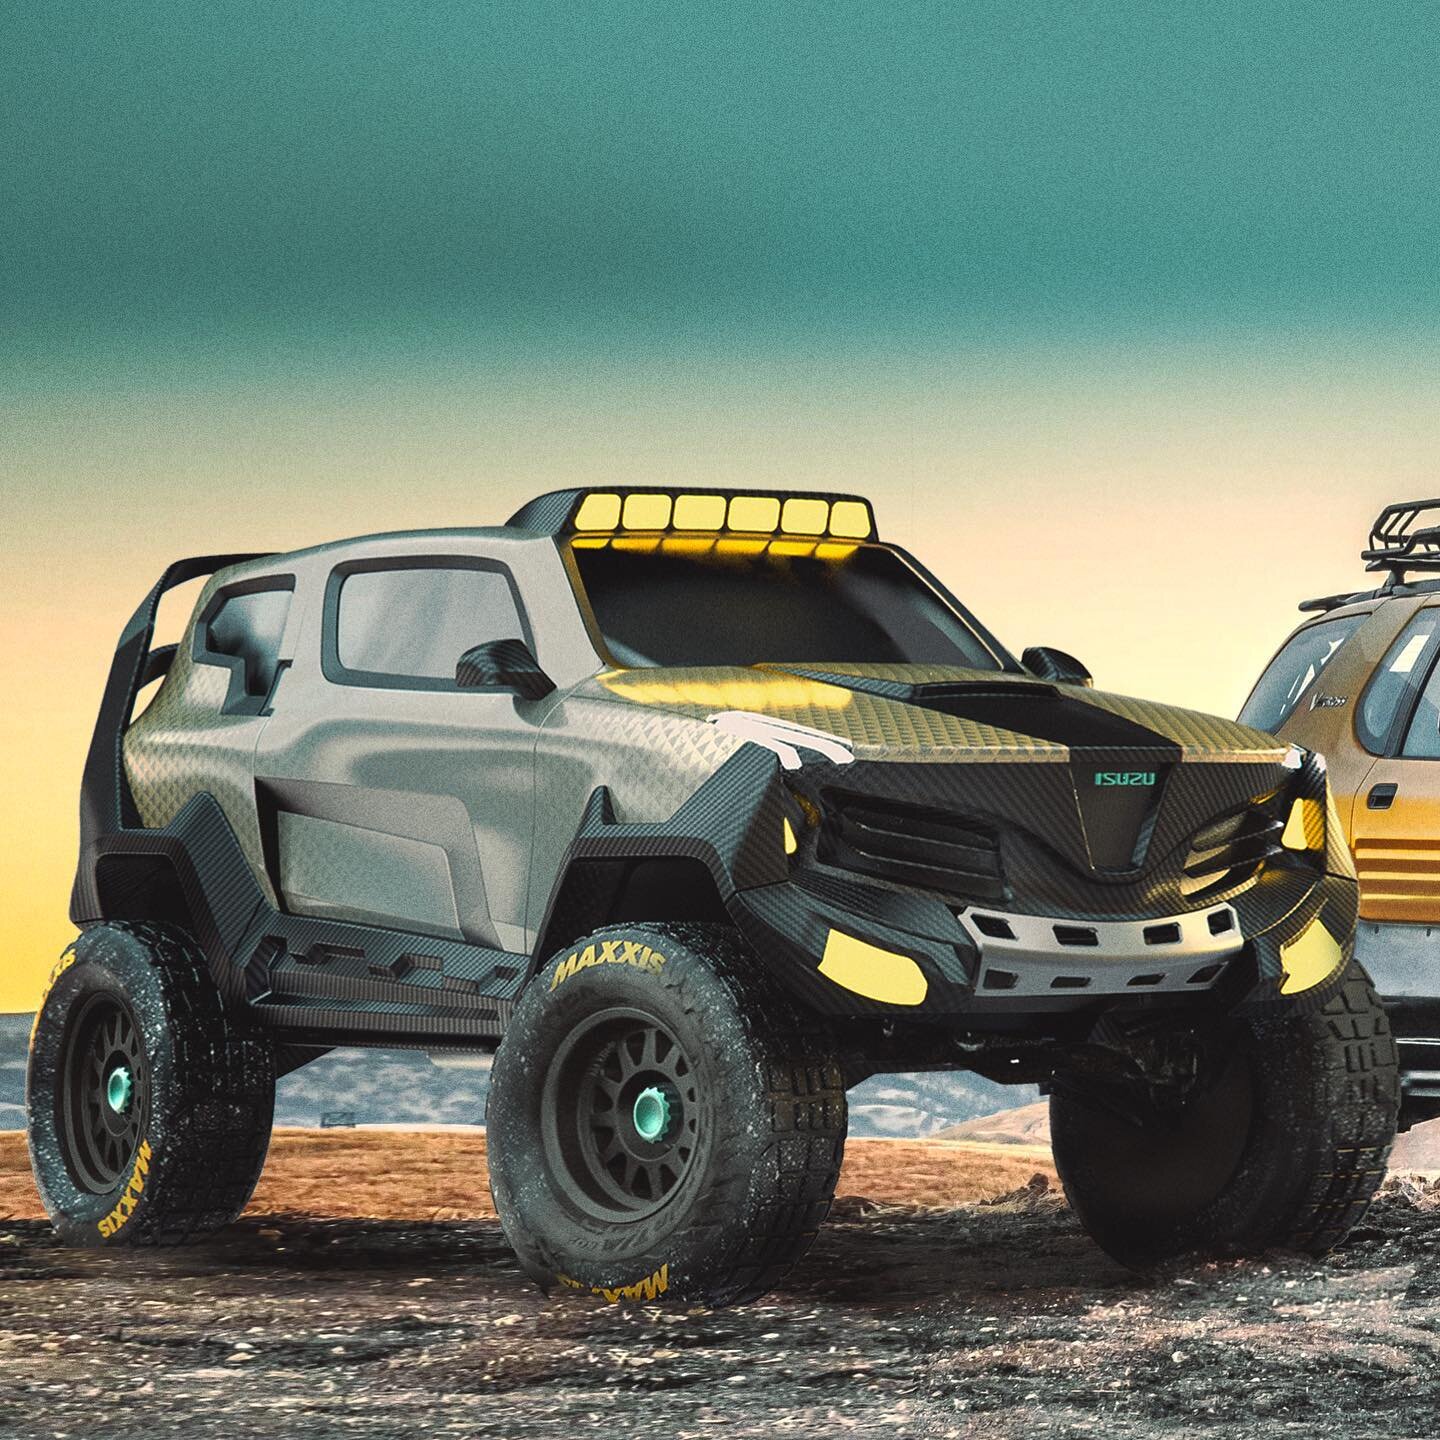 Isuzu XVX Dakar - a concept homage to the legendary Vehicross. 
&bull;
Modeled in @adskfusion360. Rendered in KeyShot. Shopped in Photo.
&bull;
#sandrodesigned
#vehicross
#isuzuvehicross
#jdmsuv
#jdm
#lifted
#offroadlife
#offroad
#4x4life
#carsketch
